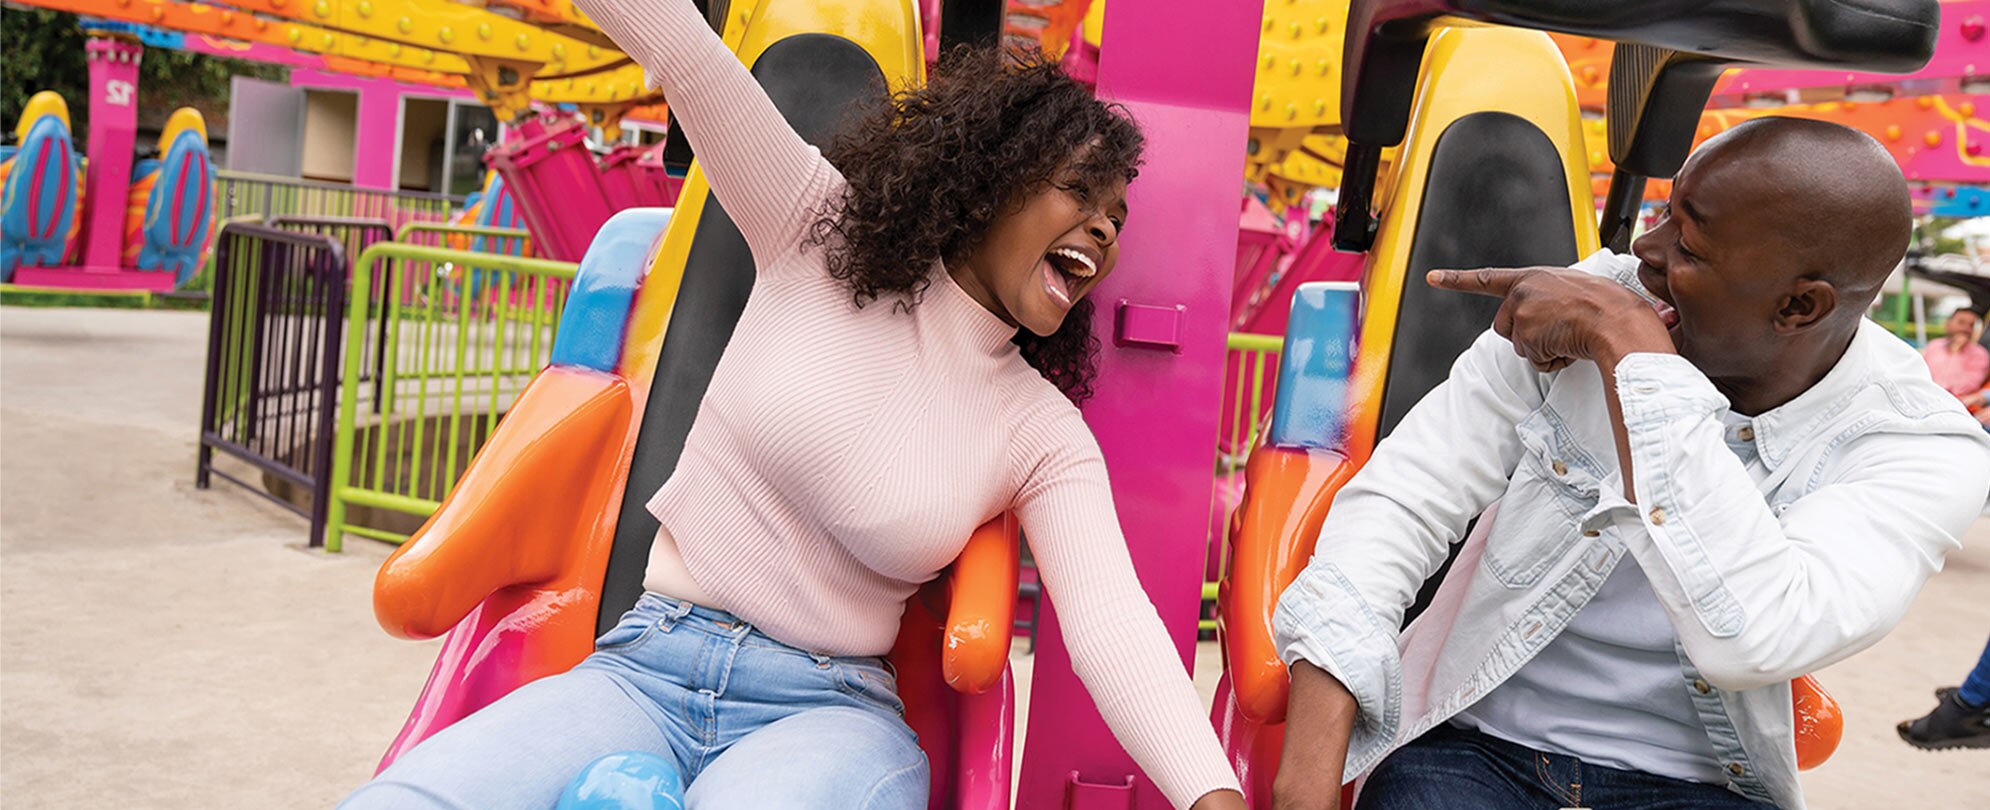 A man and woman smiling at each other while sitting on a carnival ride.